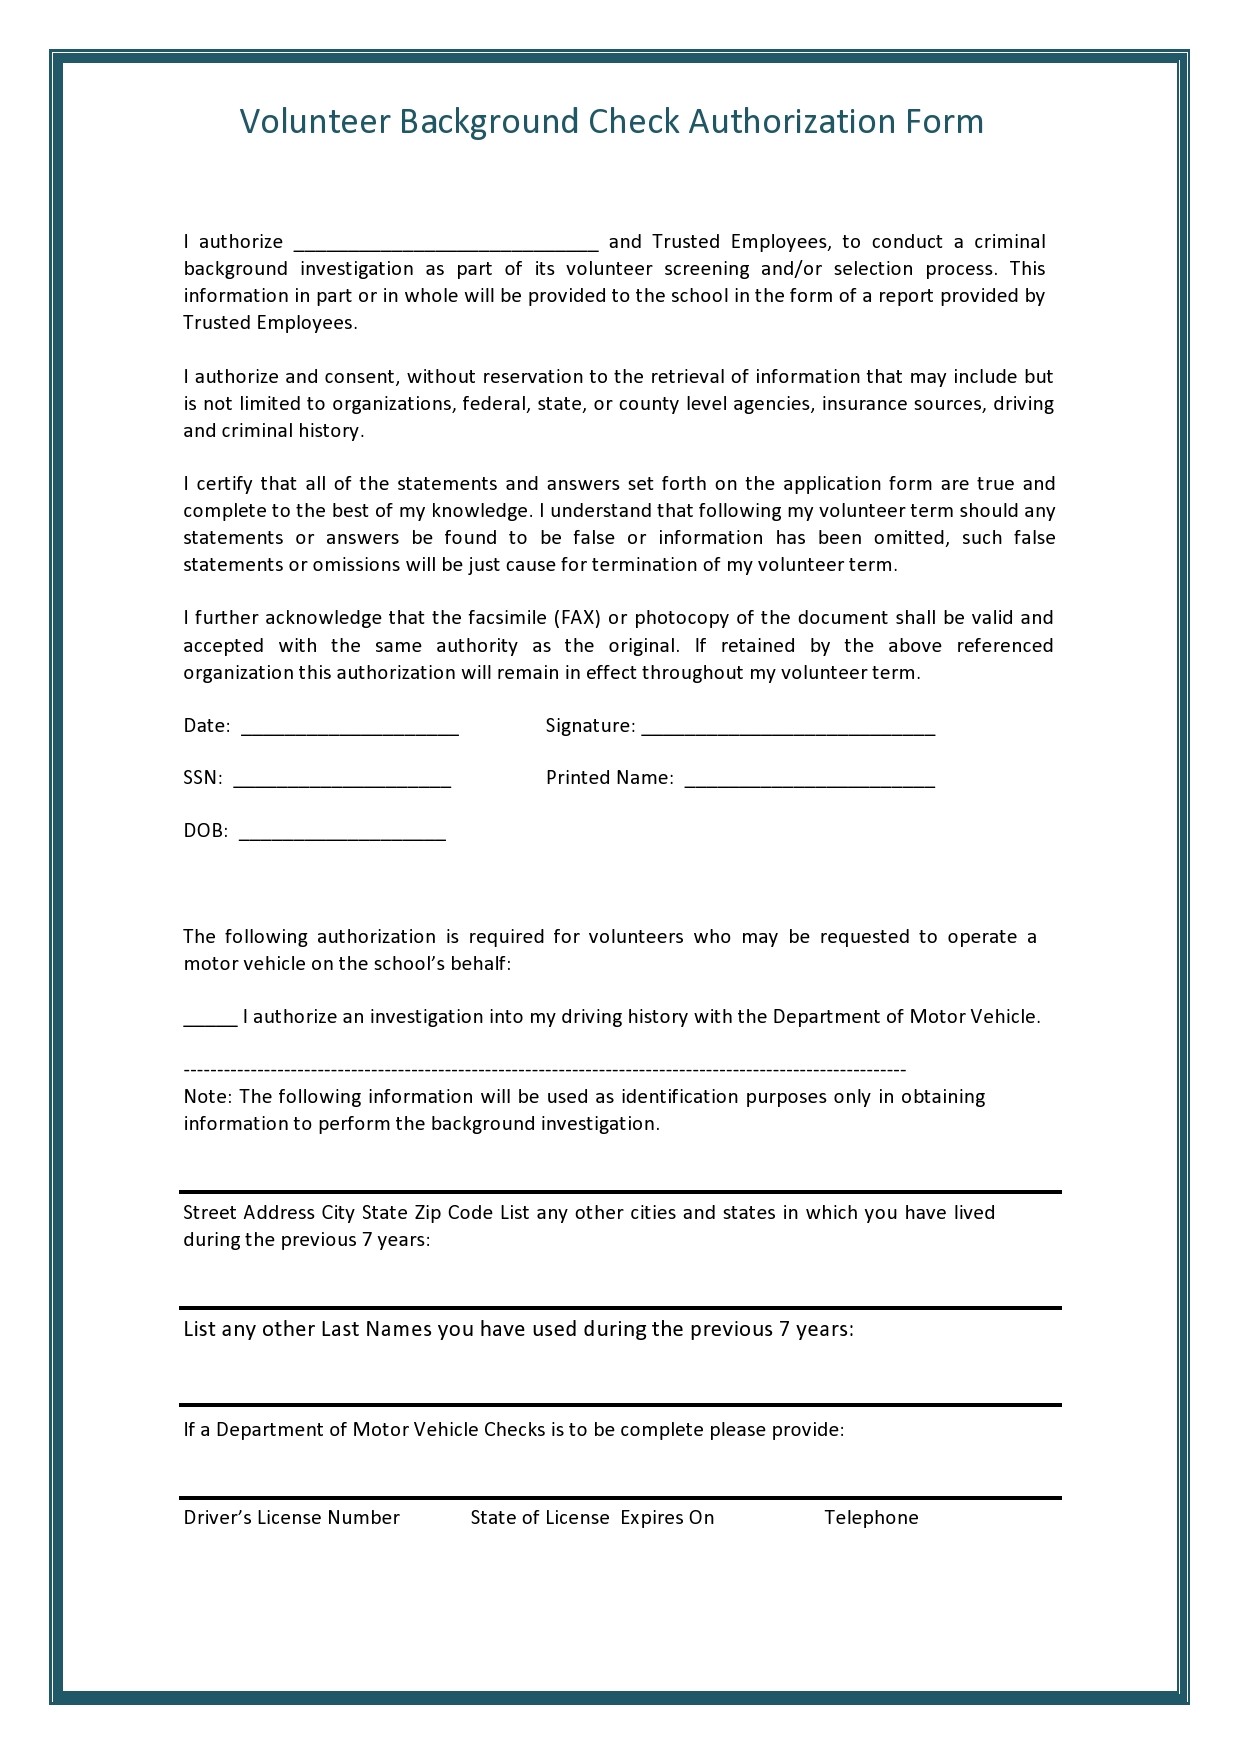 Free background check form 15